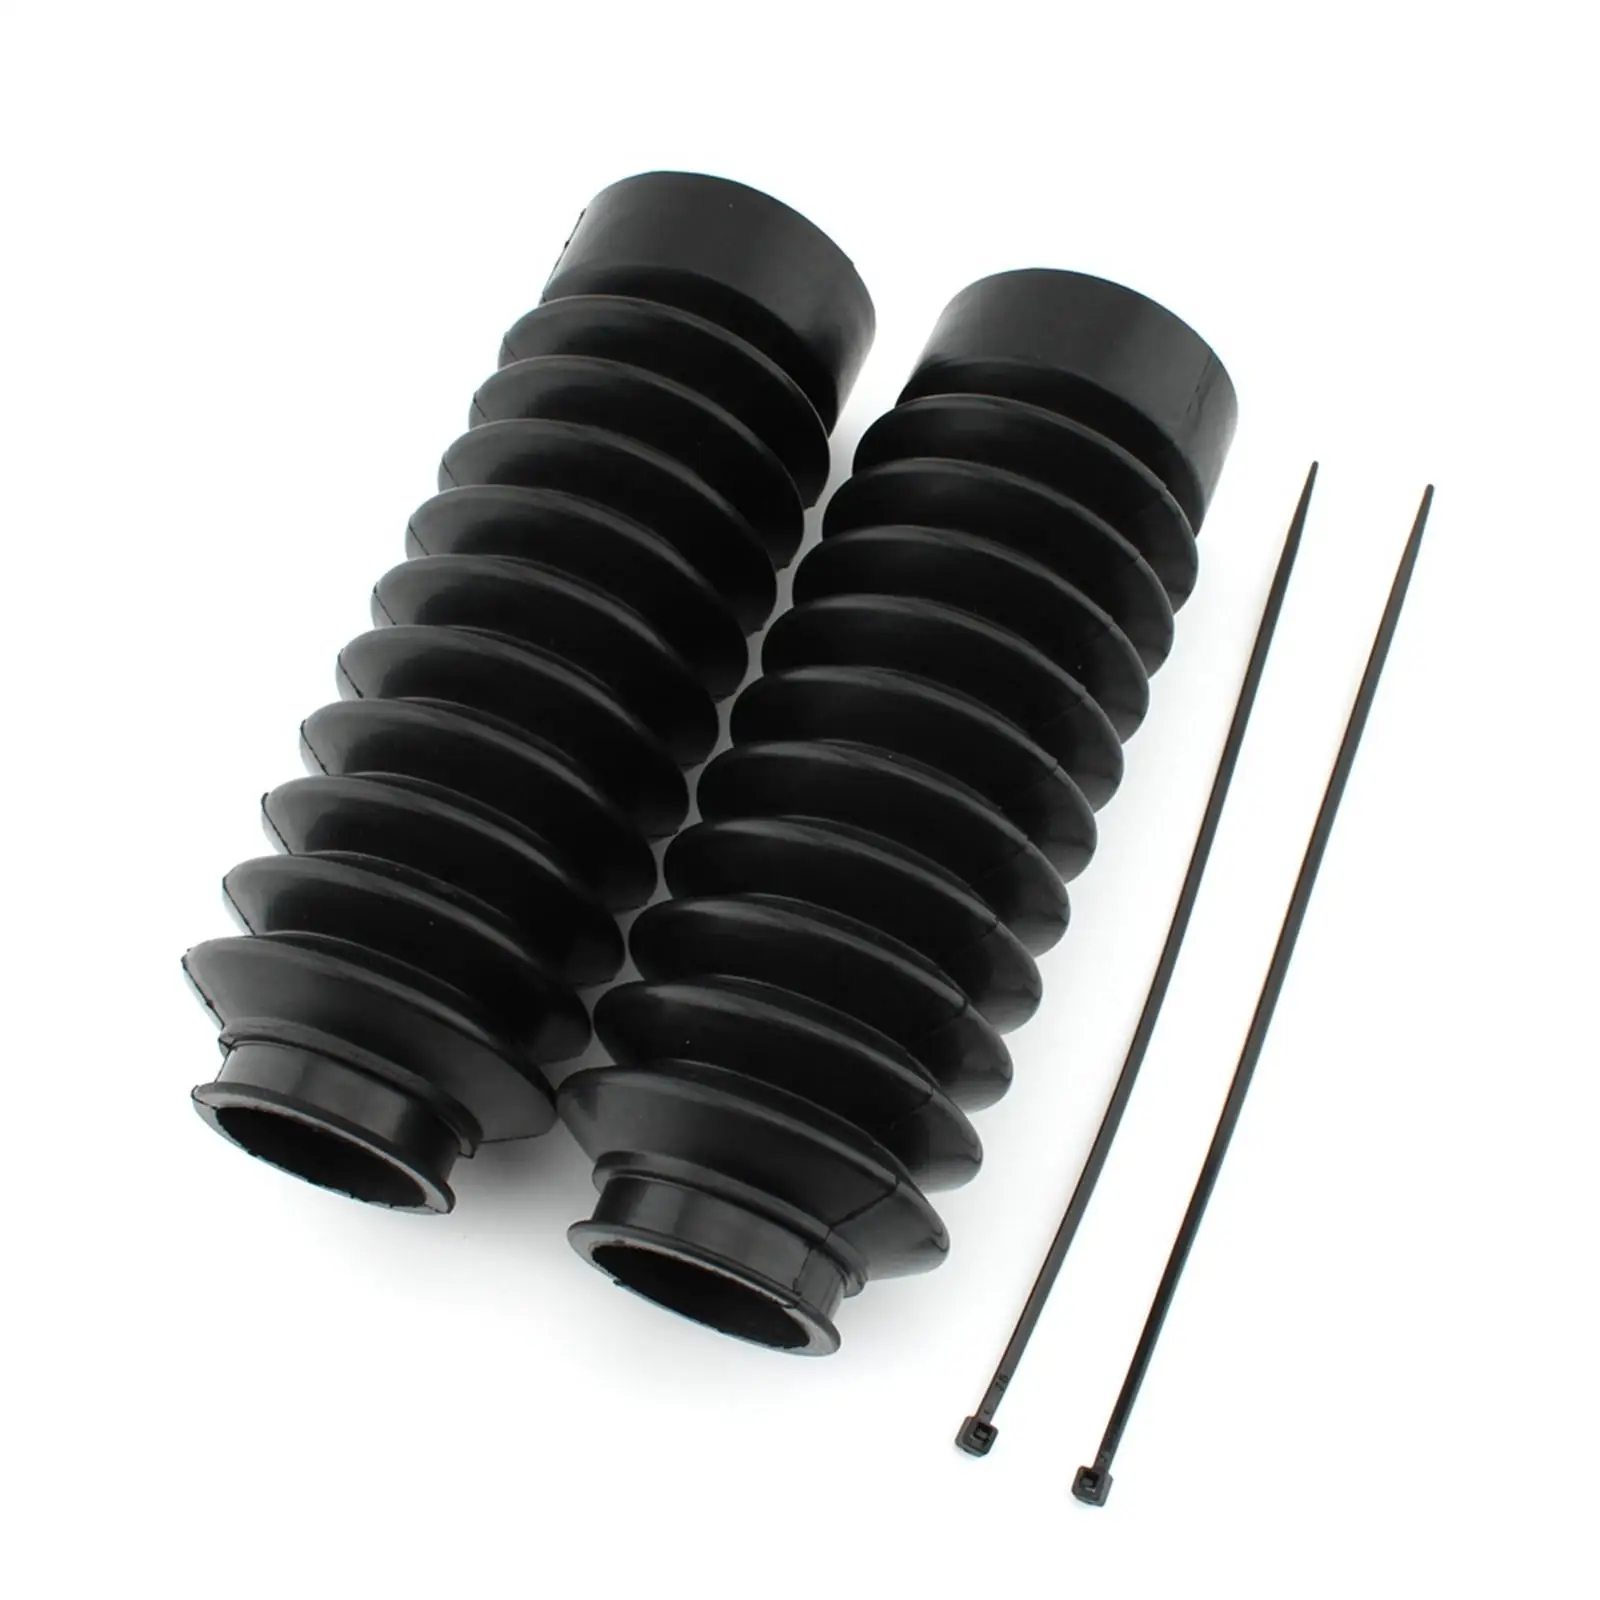 Motorcycle Front Fork Cover Shock Absorber Covers Protector Front Fork Shock Boots for CB400SS CB400 Black Professional